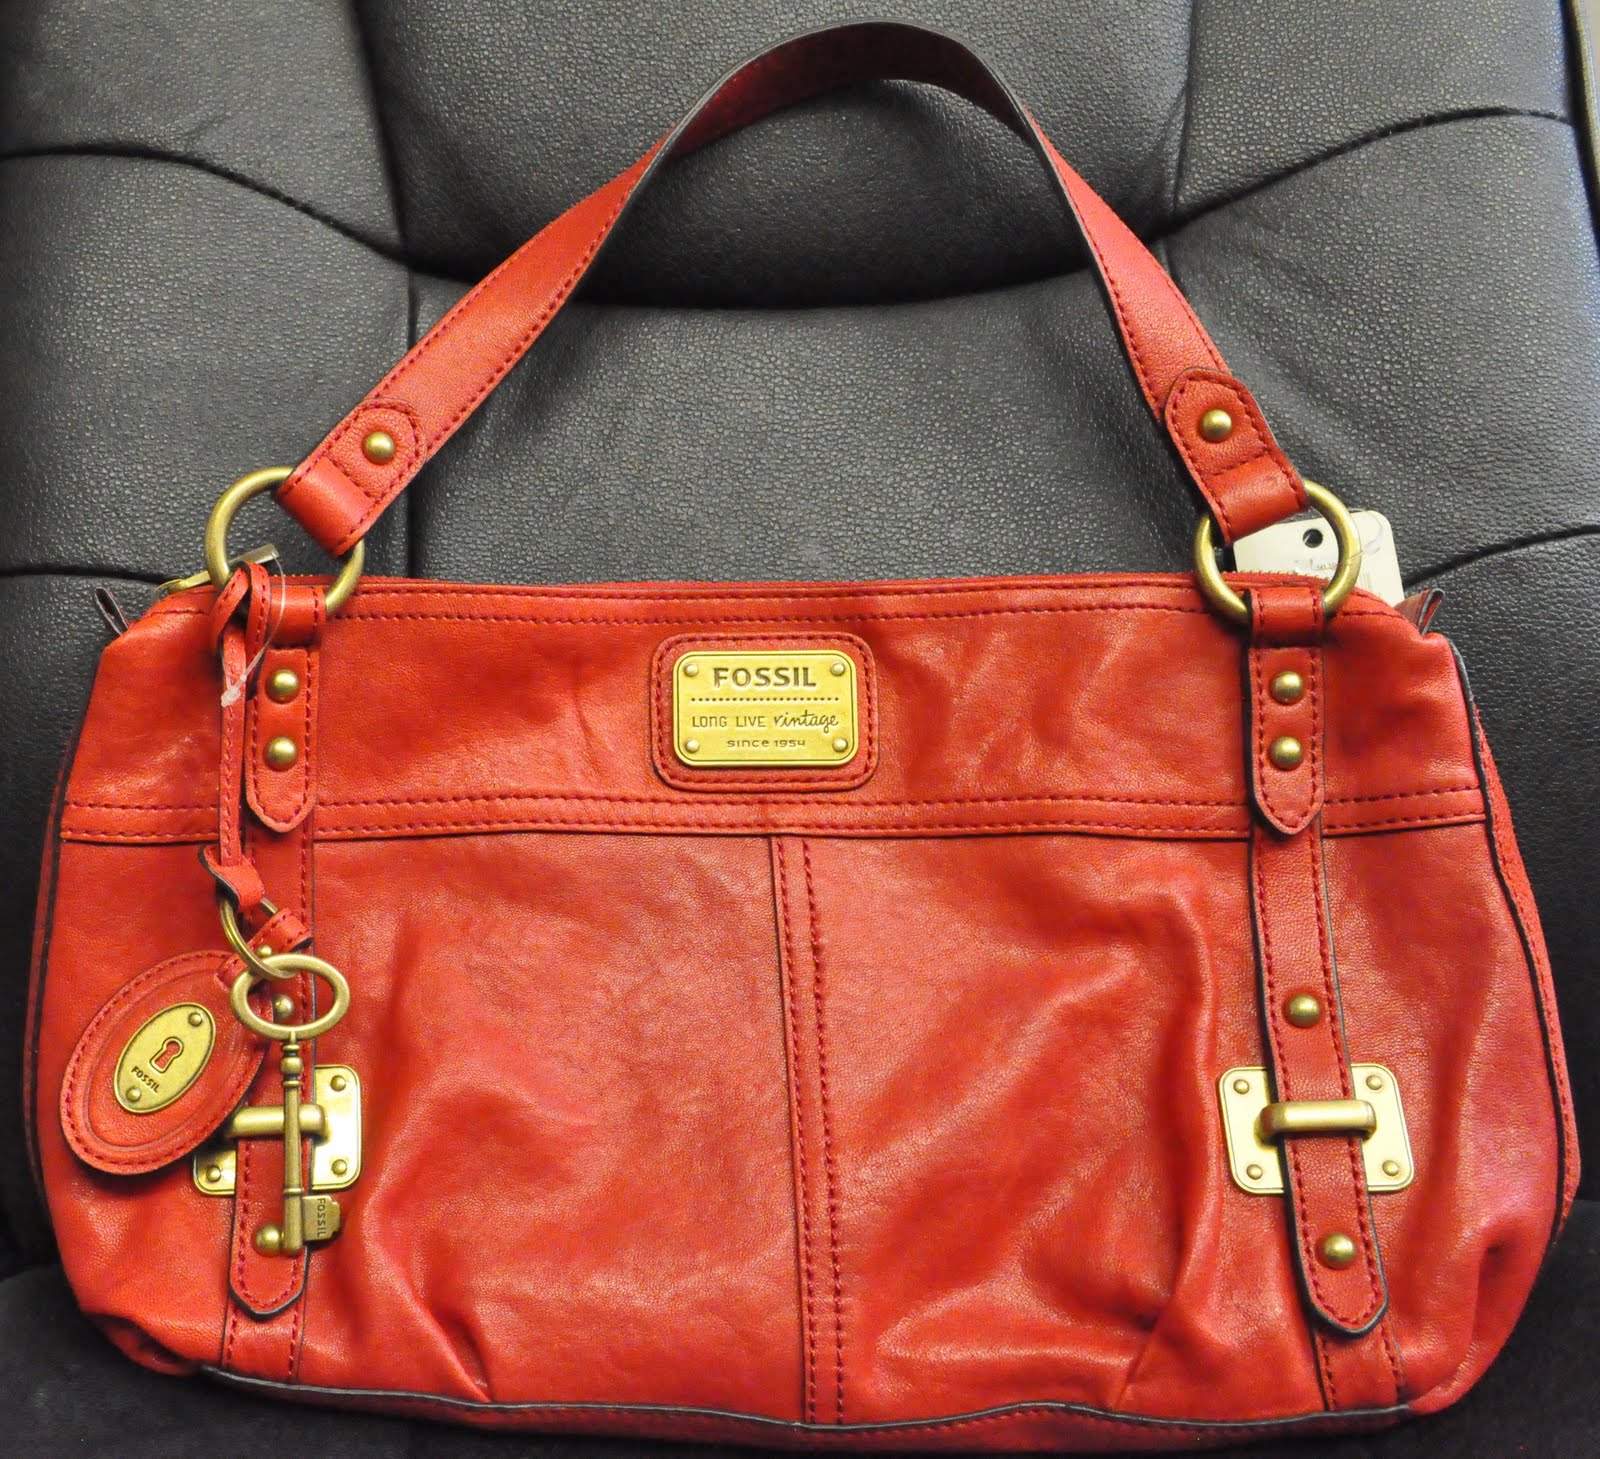 Authentic Fossil Reseller Malaysia: Fossil Ginger Satchel Handbag *SOLD!*